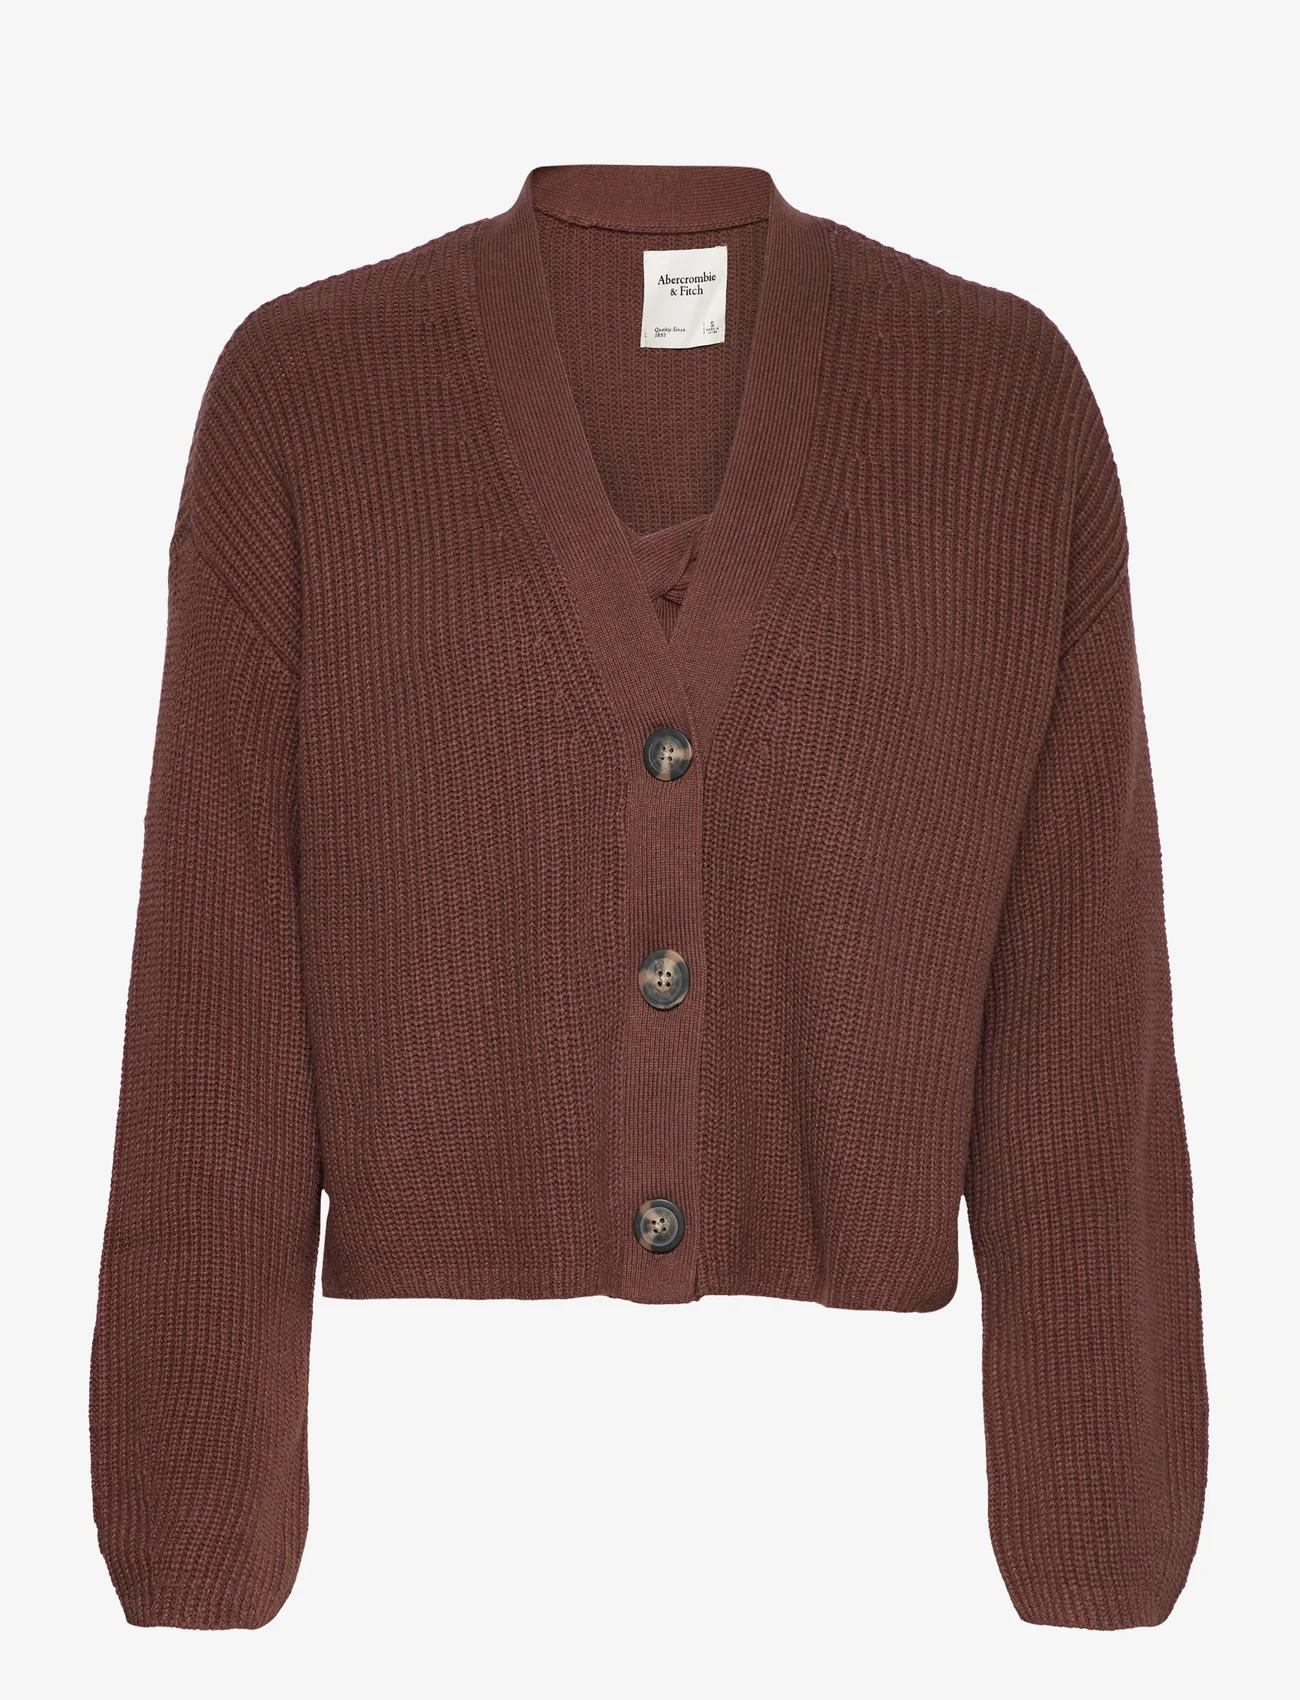 Abercrombie & Fitch - ANF WOMENS SWEATERS - swetry rozpinane - cappuccino - 0